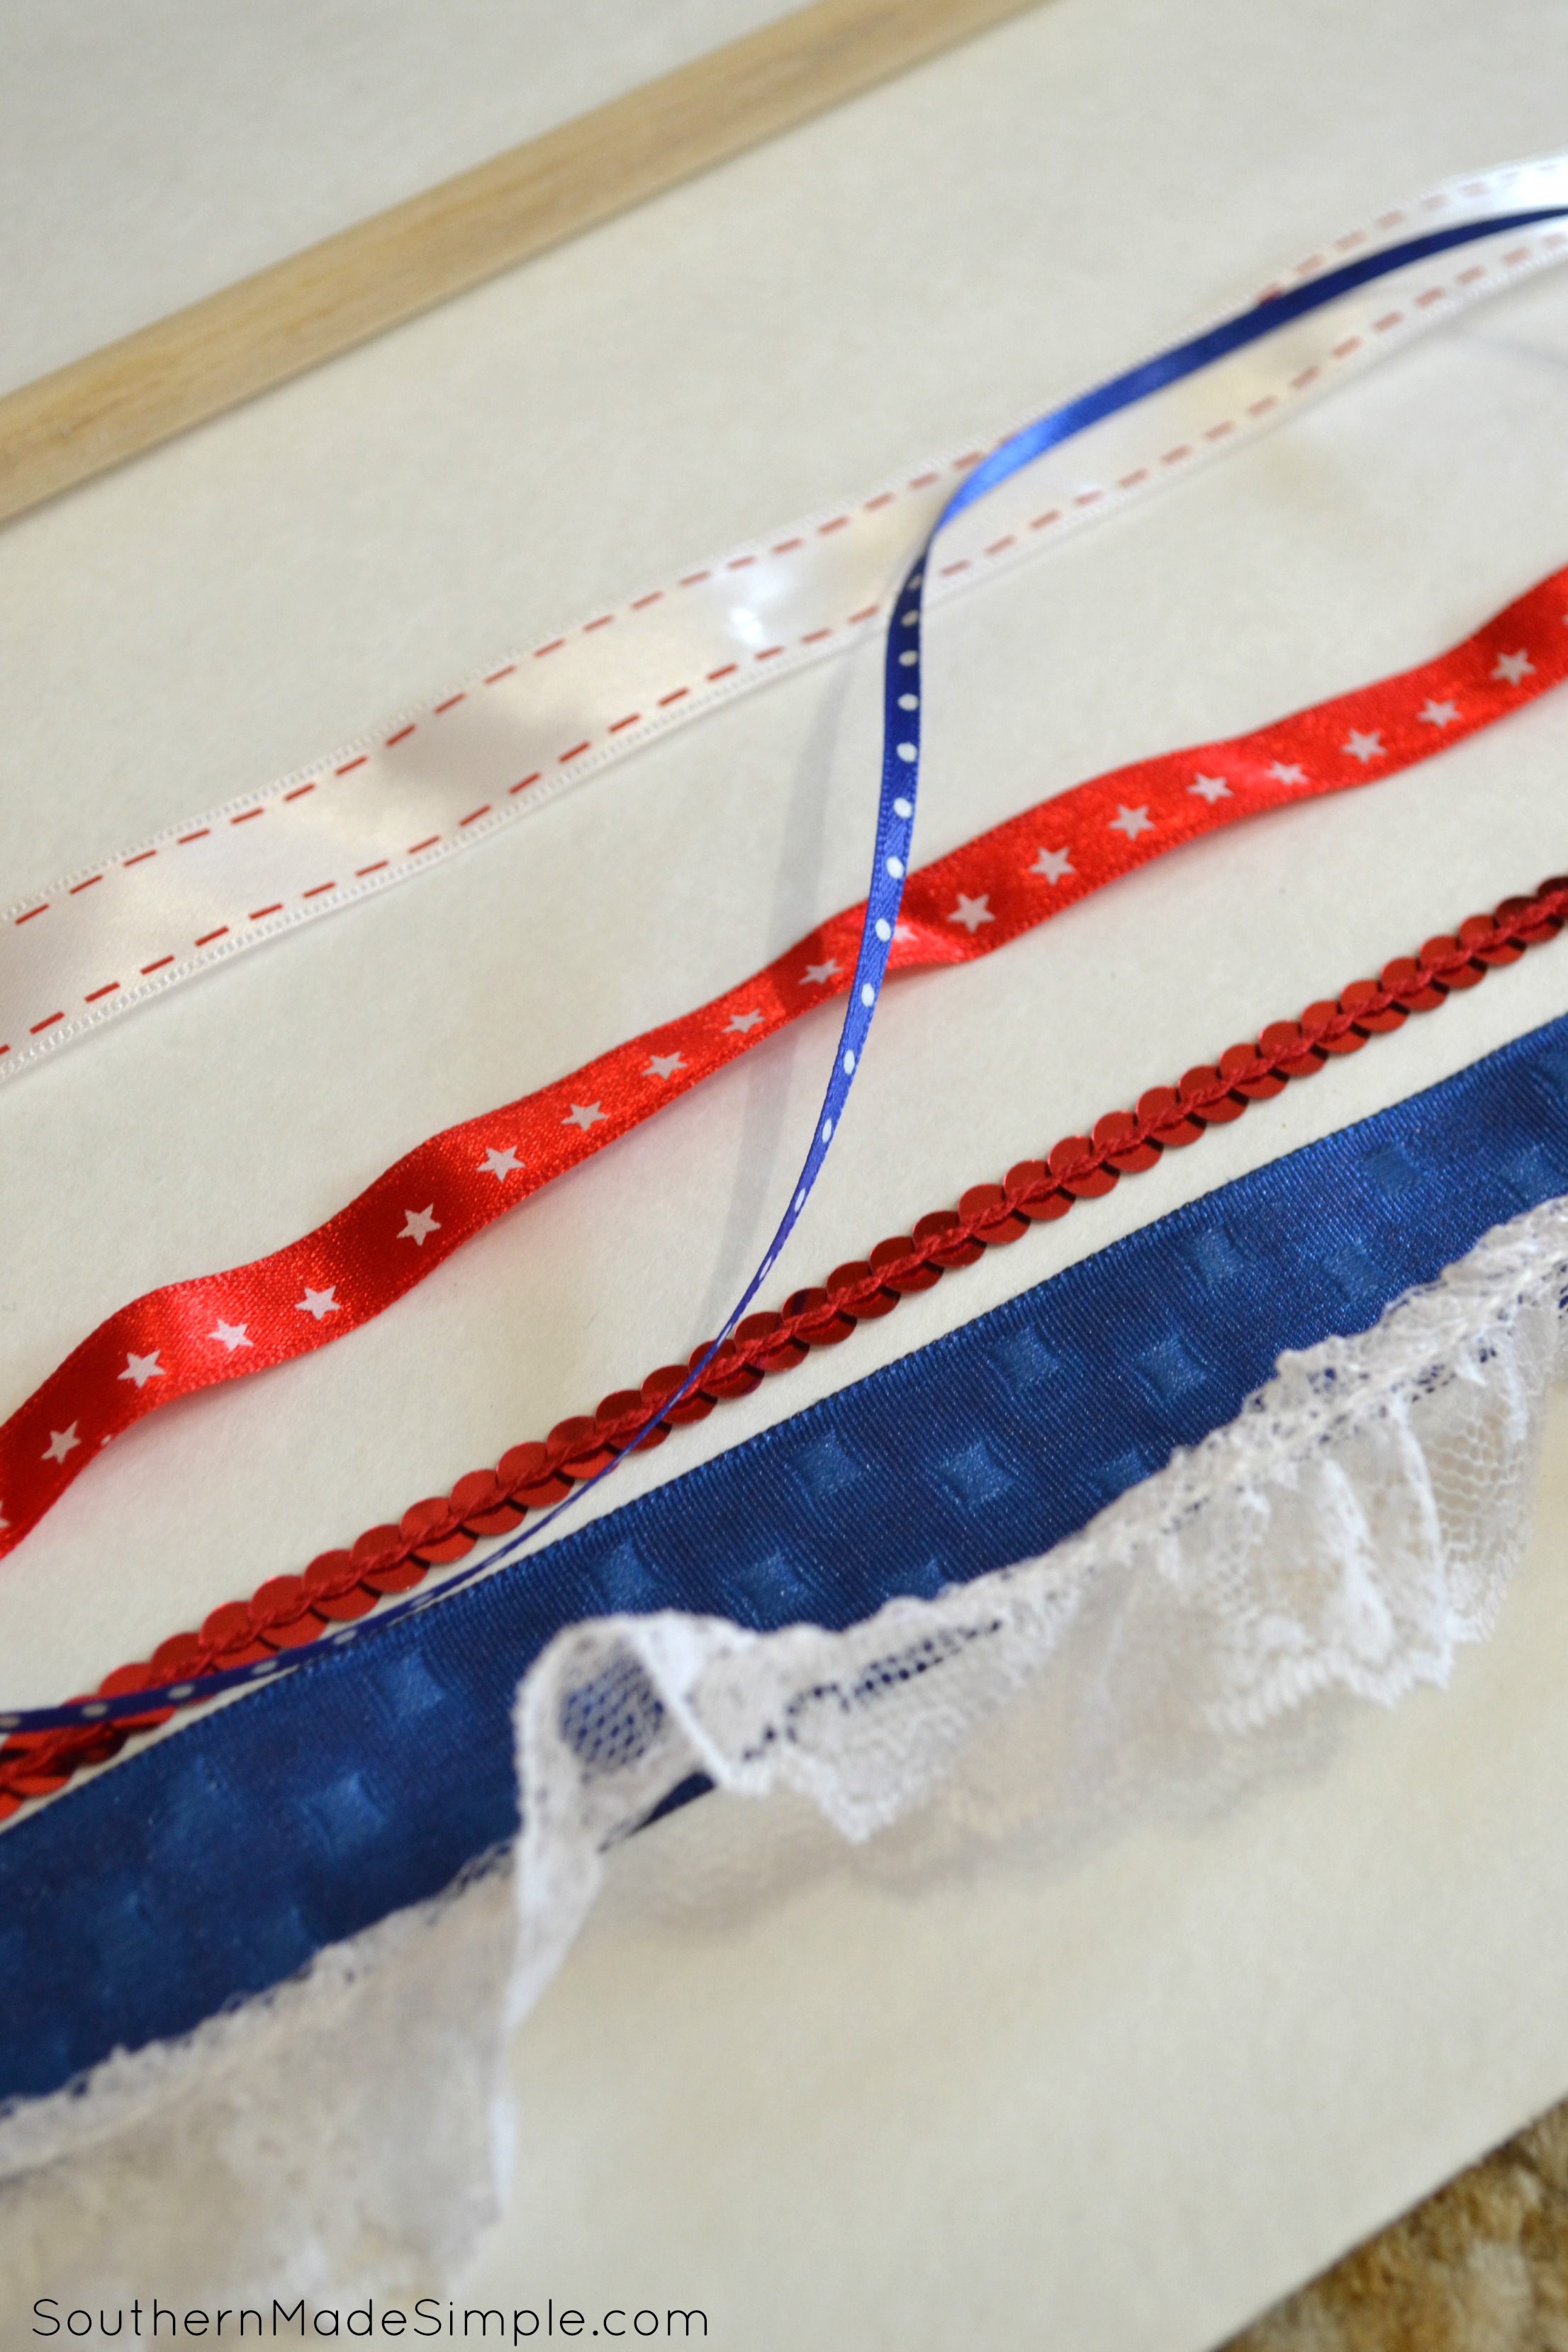 4th of July Craft: DIY Ribbon Wand - the perfect alternative to sparklers!